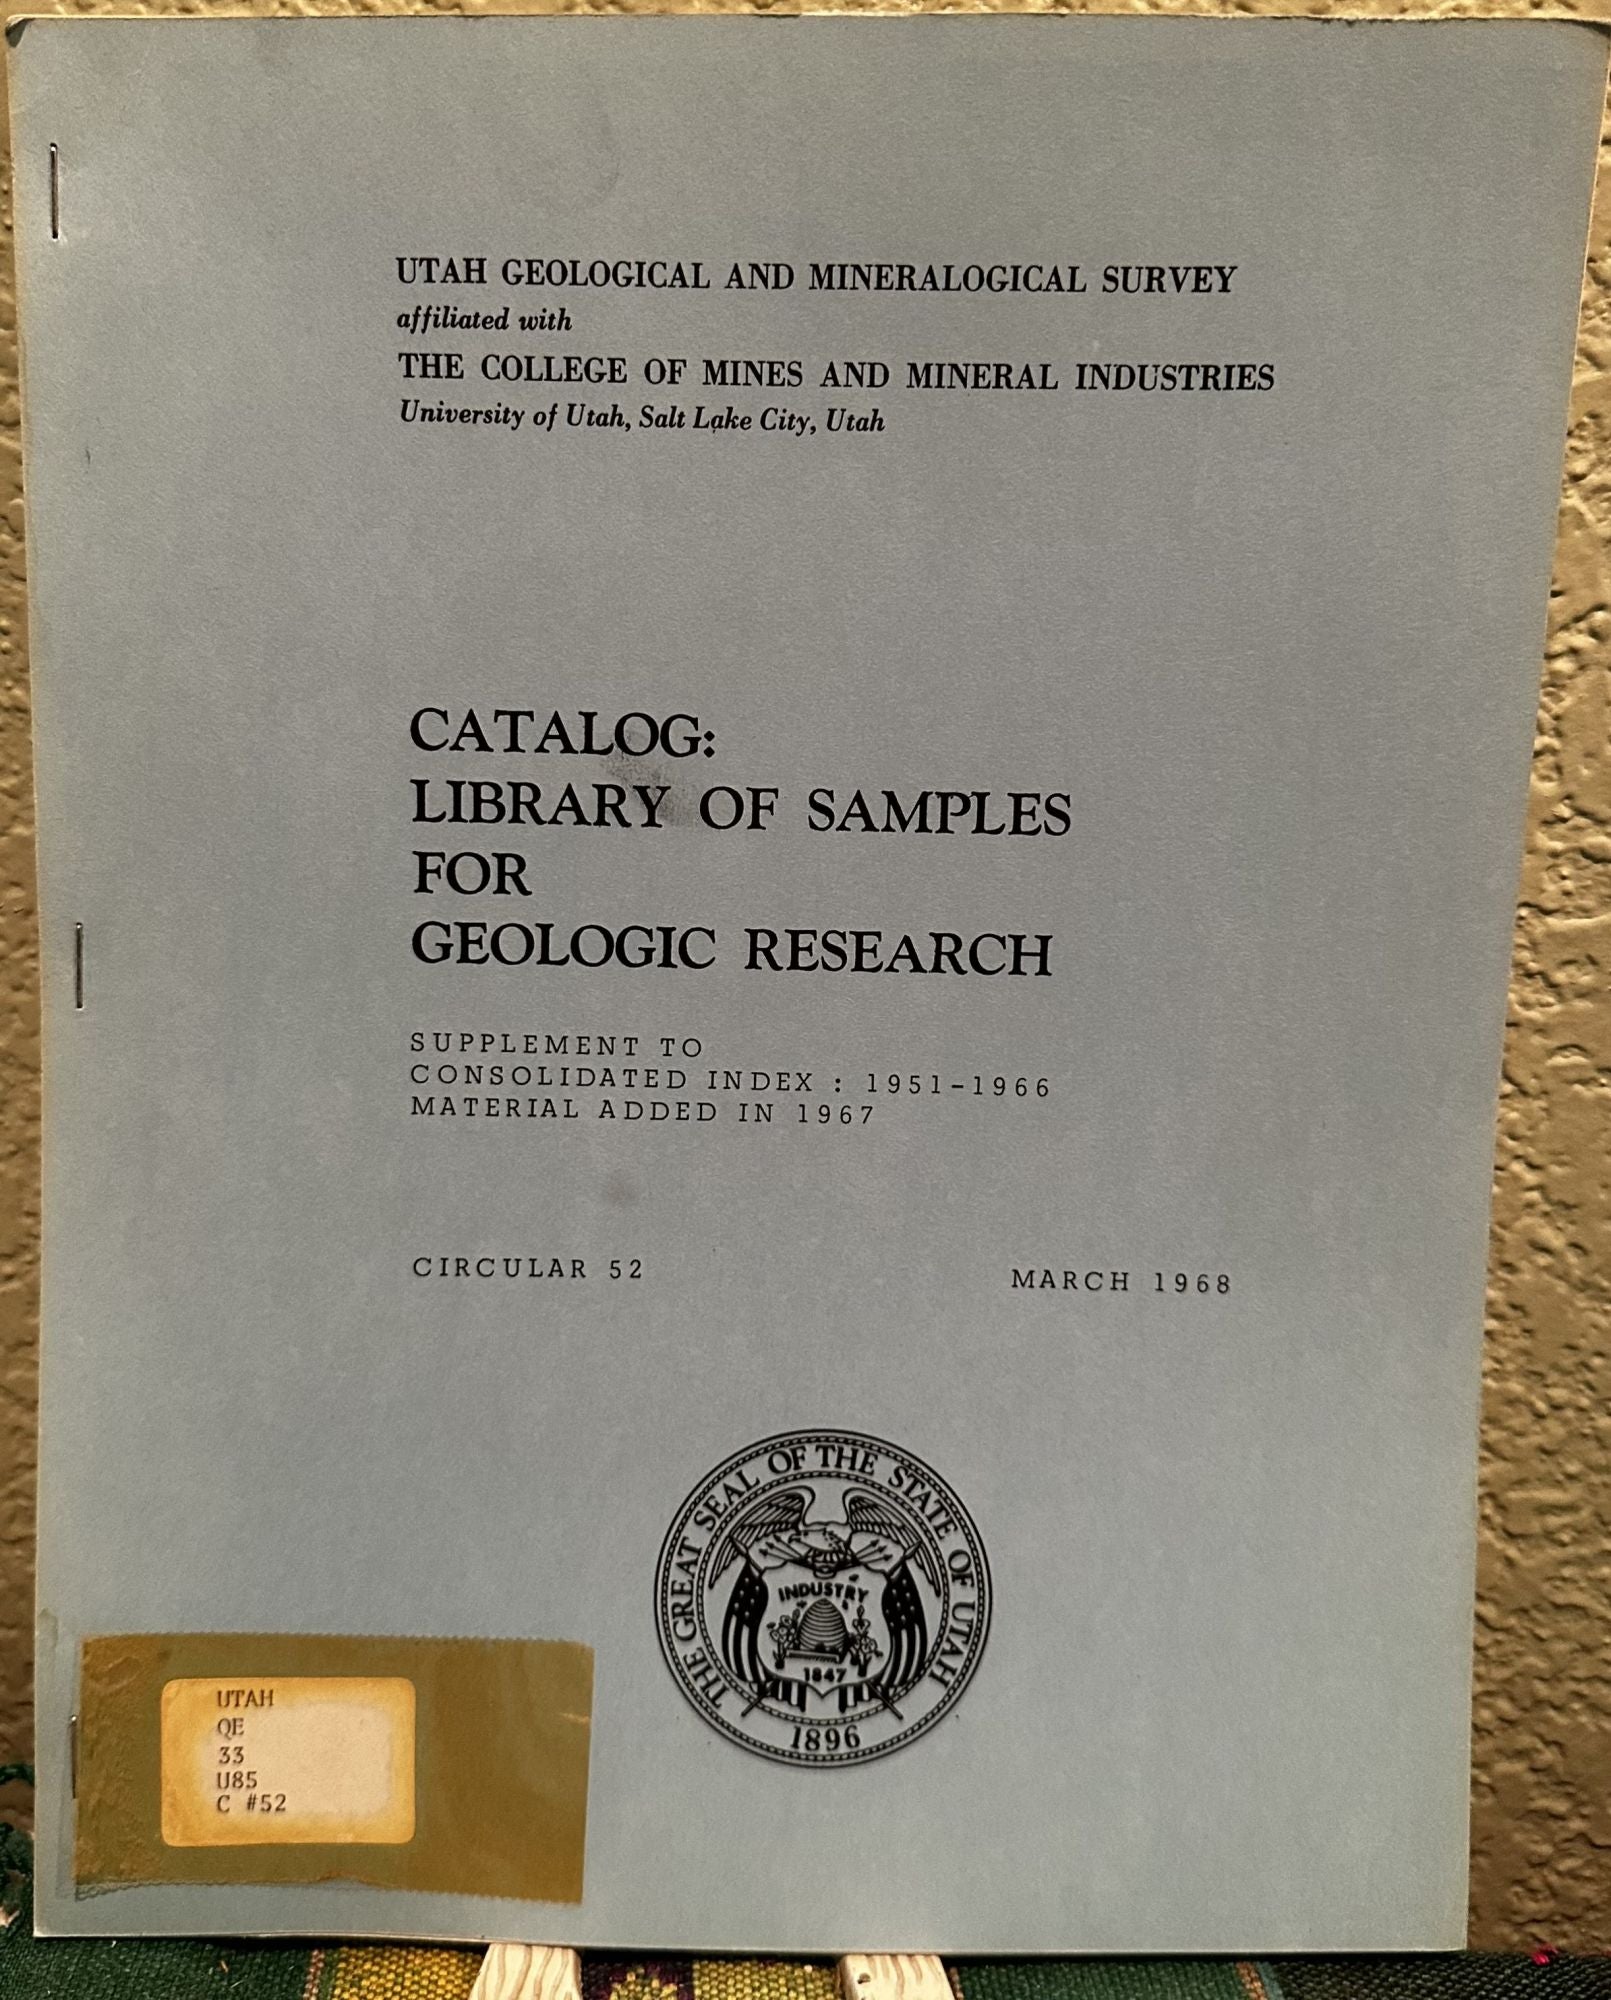 Catalog: Library of Samples for Geologic Research Supplement to Consolidated Index 1951-1966. W. D. Byrd, compilers.